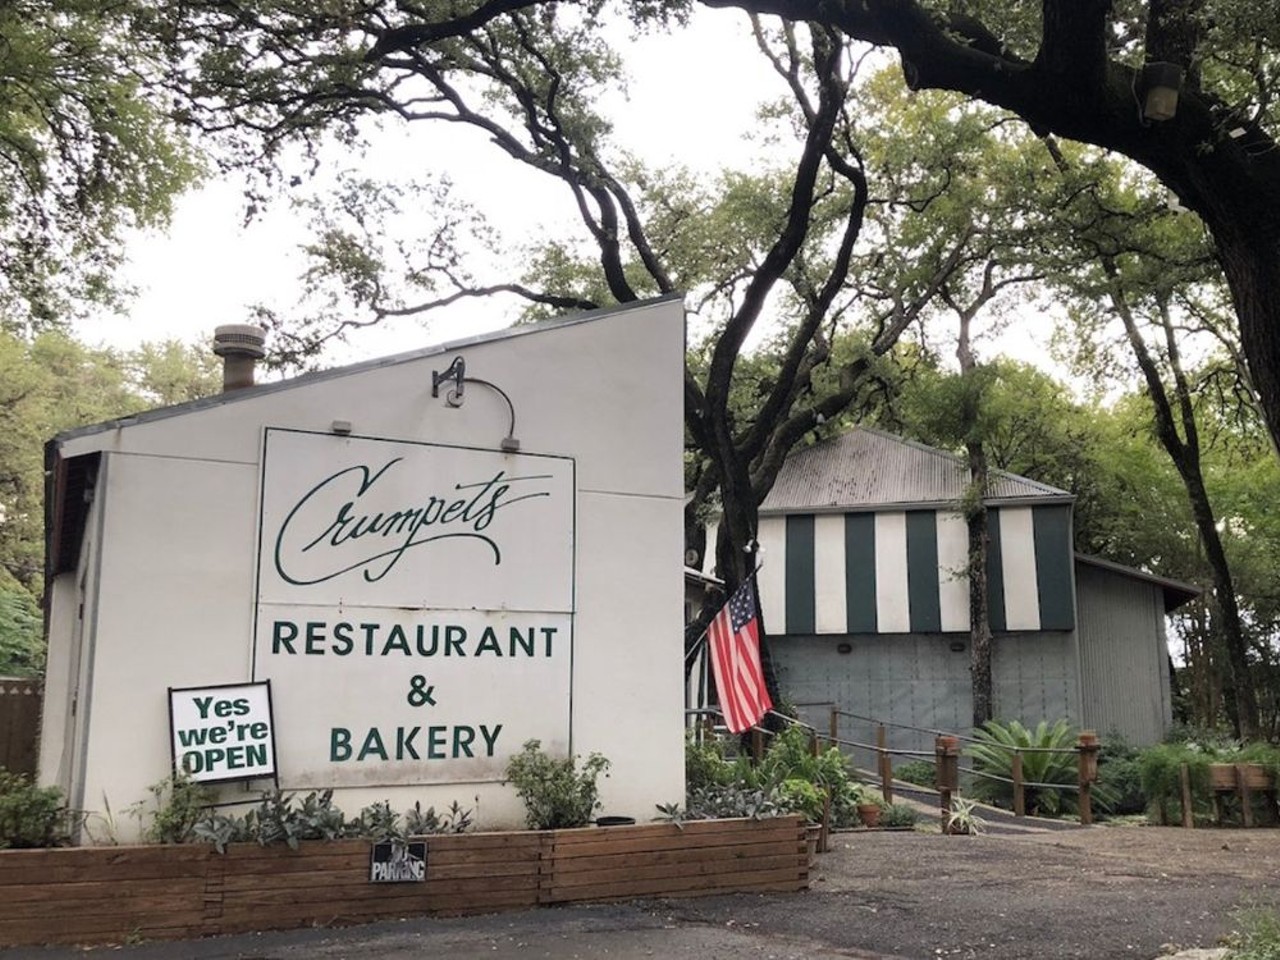 Crumpets Restaurant and Bakery
3920 Harry Wurzbach Road
After 38 years in business, chef and owner Francoi Maeder bid adieu to his long-standing Crumpets in September of 2018. Maeder’s culinary career in SA dates back to 1977, and he is now available for hire as a private wine specialist, gourmet chef and pastry chef.